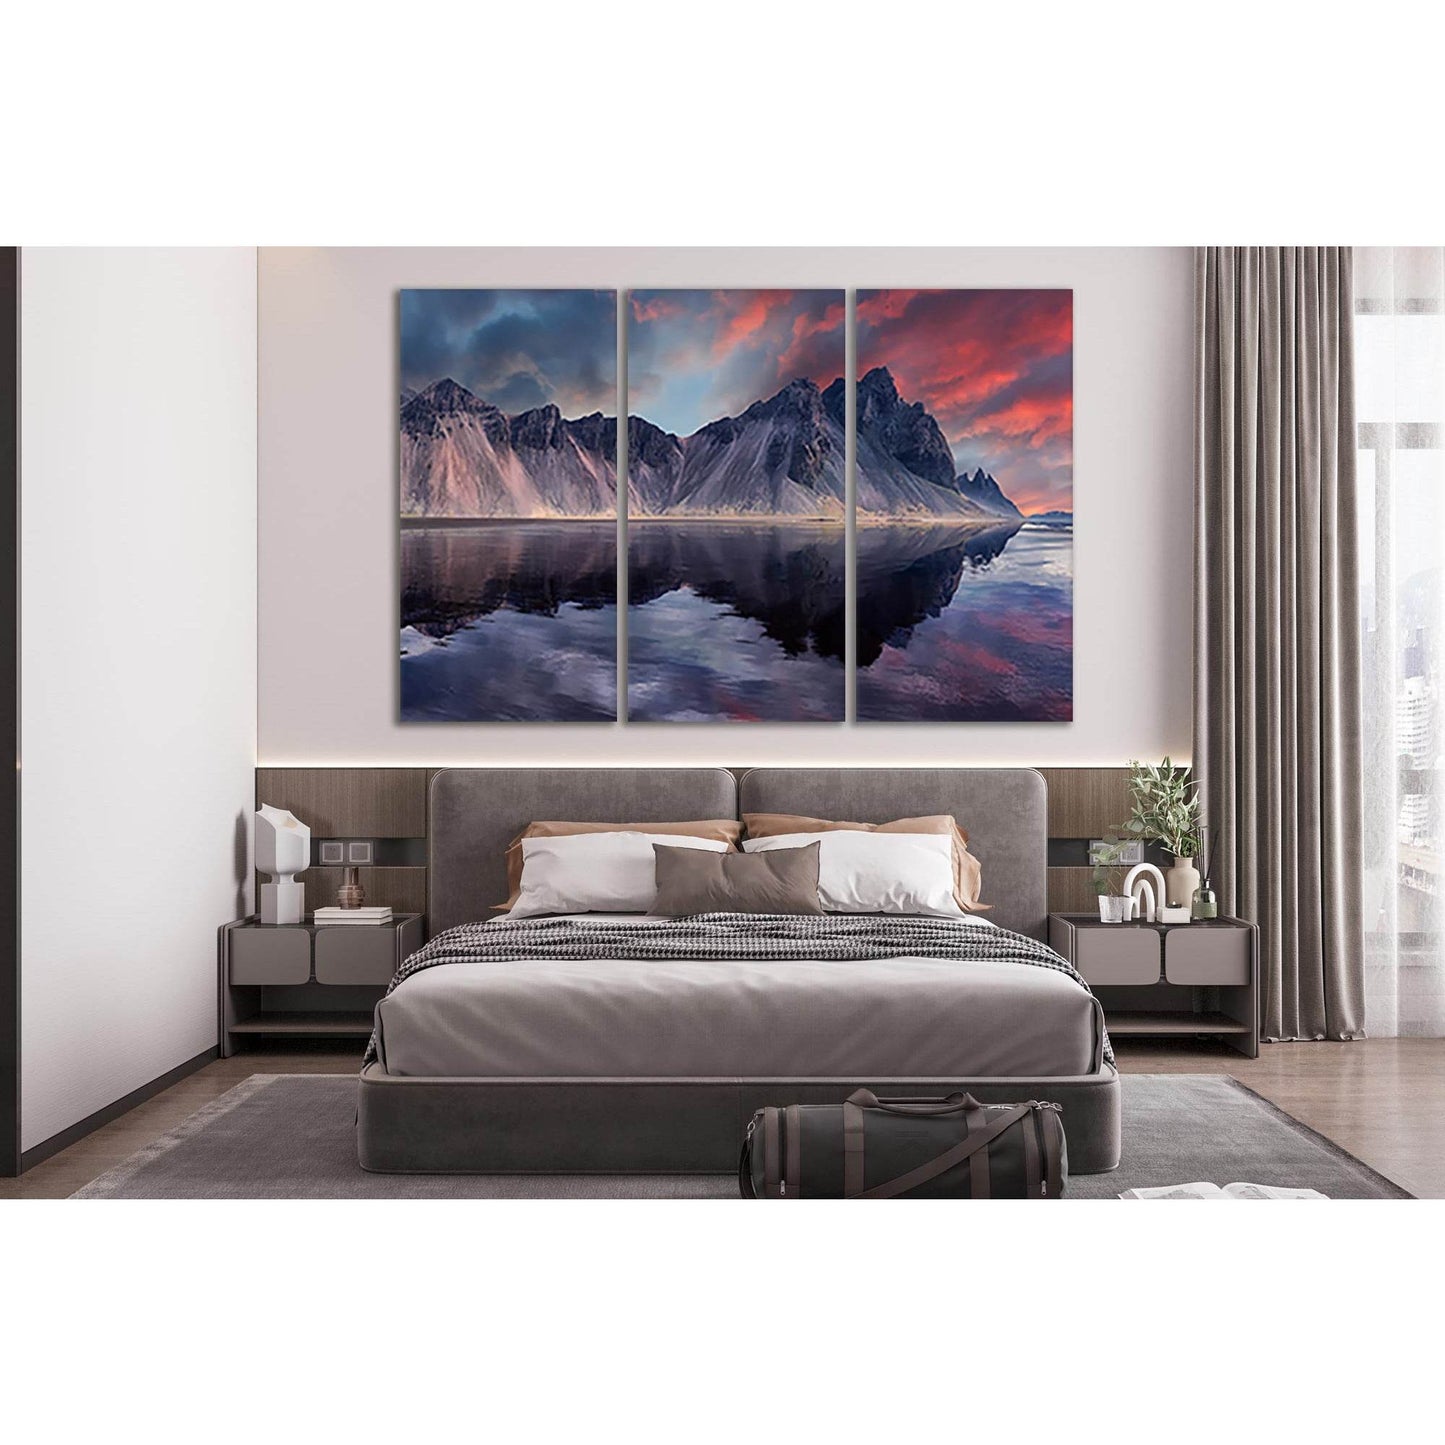 Nature's Mirror: Vestrahorn Mountain Art PrintThis canvas print captures the dramatic skies and stark beauty of Vestrahorn Mountain, reflected in the still waters below. It's a stunning piece of wall art that brings the grandeur of Icelandic landscapes in